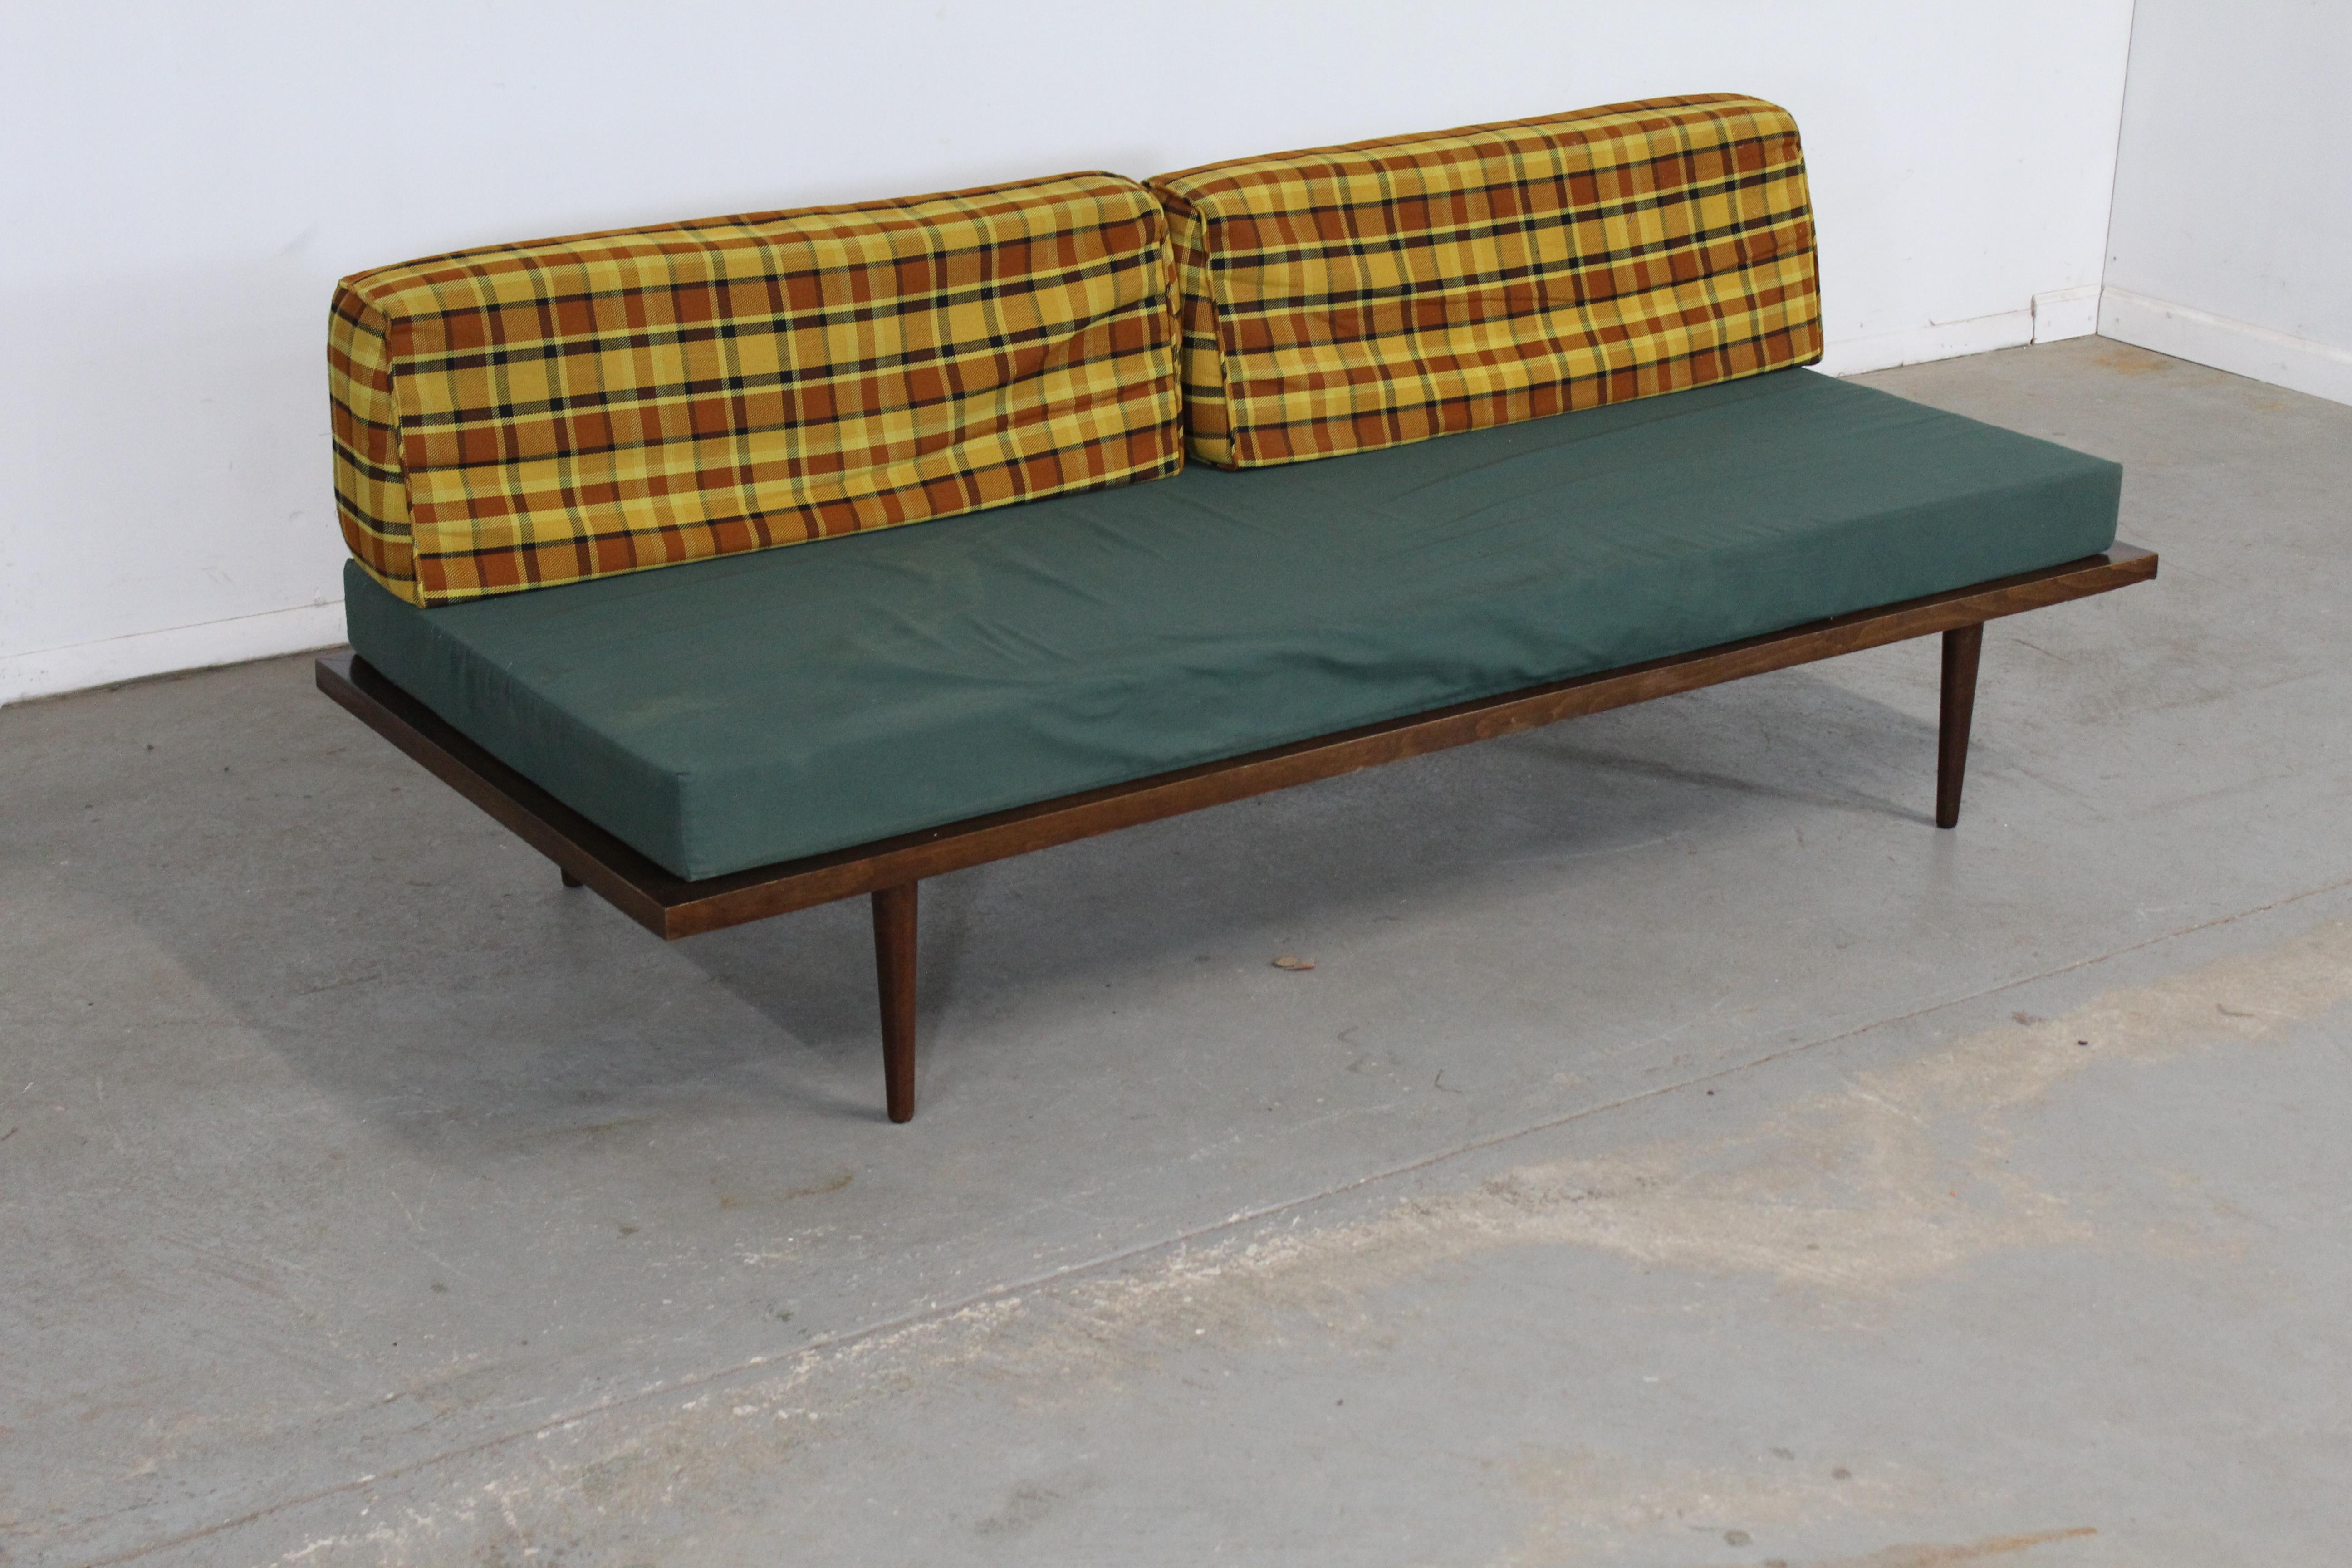 Mid-Century Modern walnut daybed / sofa.

Offered is a Mid-Century Modern walnut daybed / sofa in the style of Adrian Pearsall. The sofa has three removable cushions and is on Pencil legs. It is in great structurally sound condition. It is in good